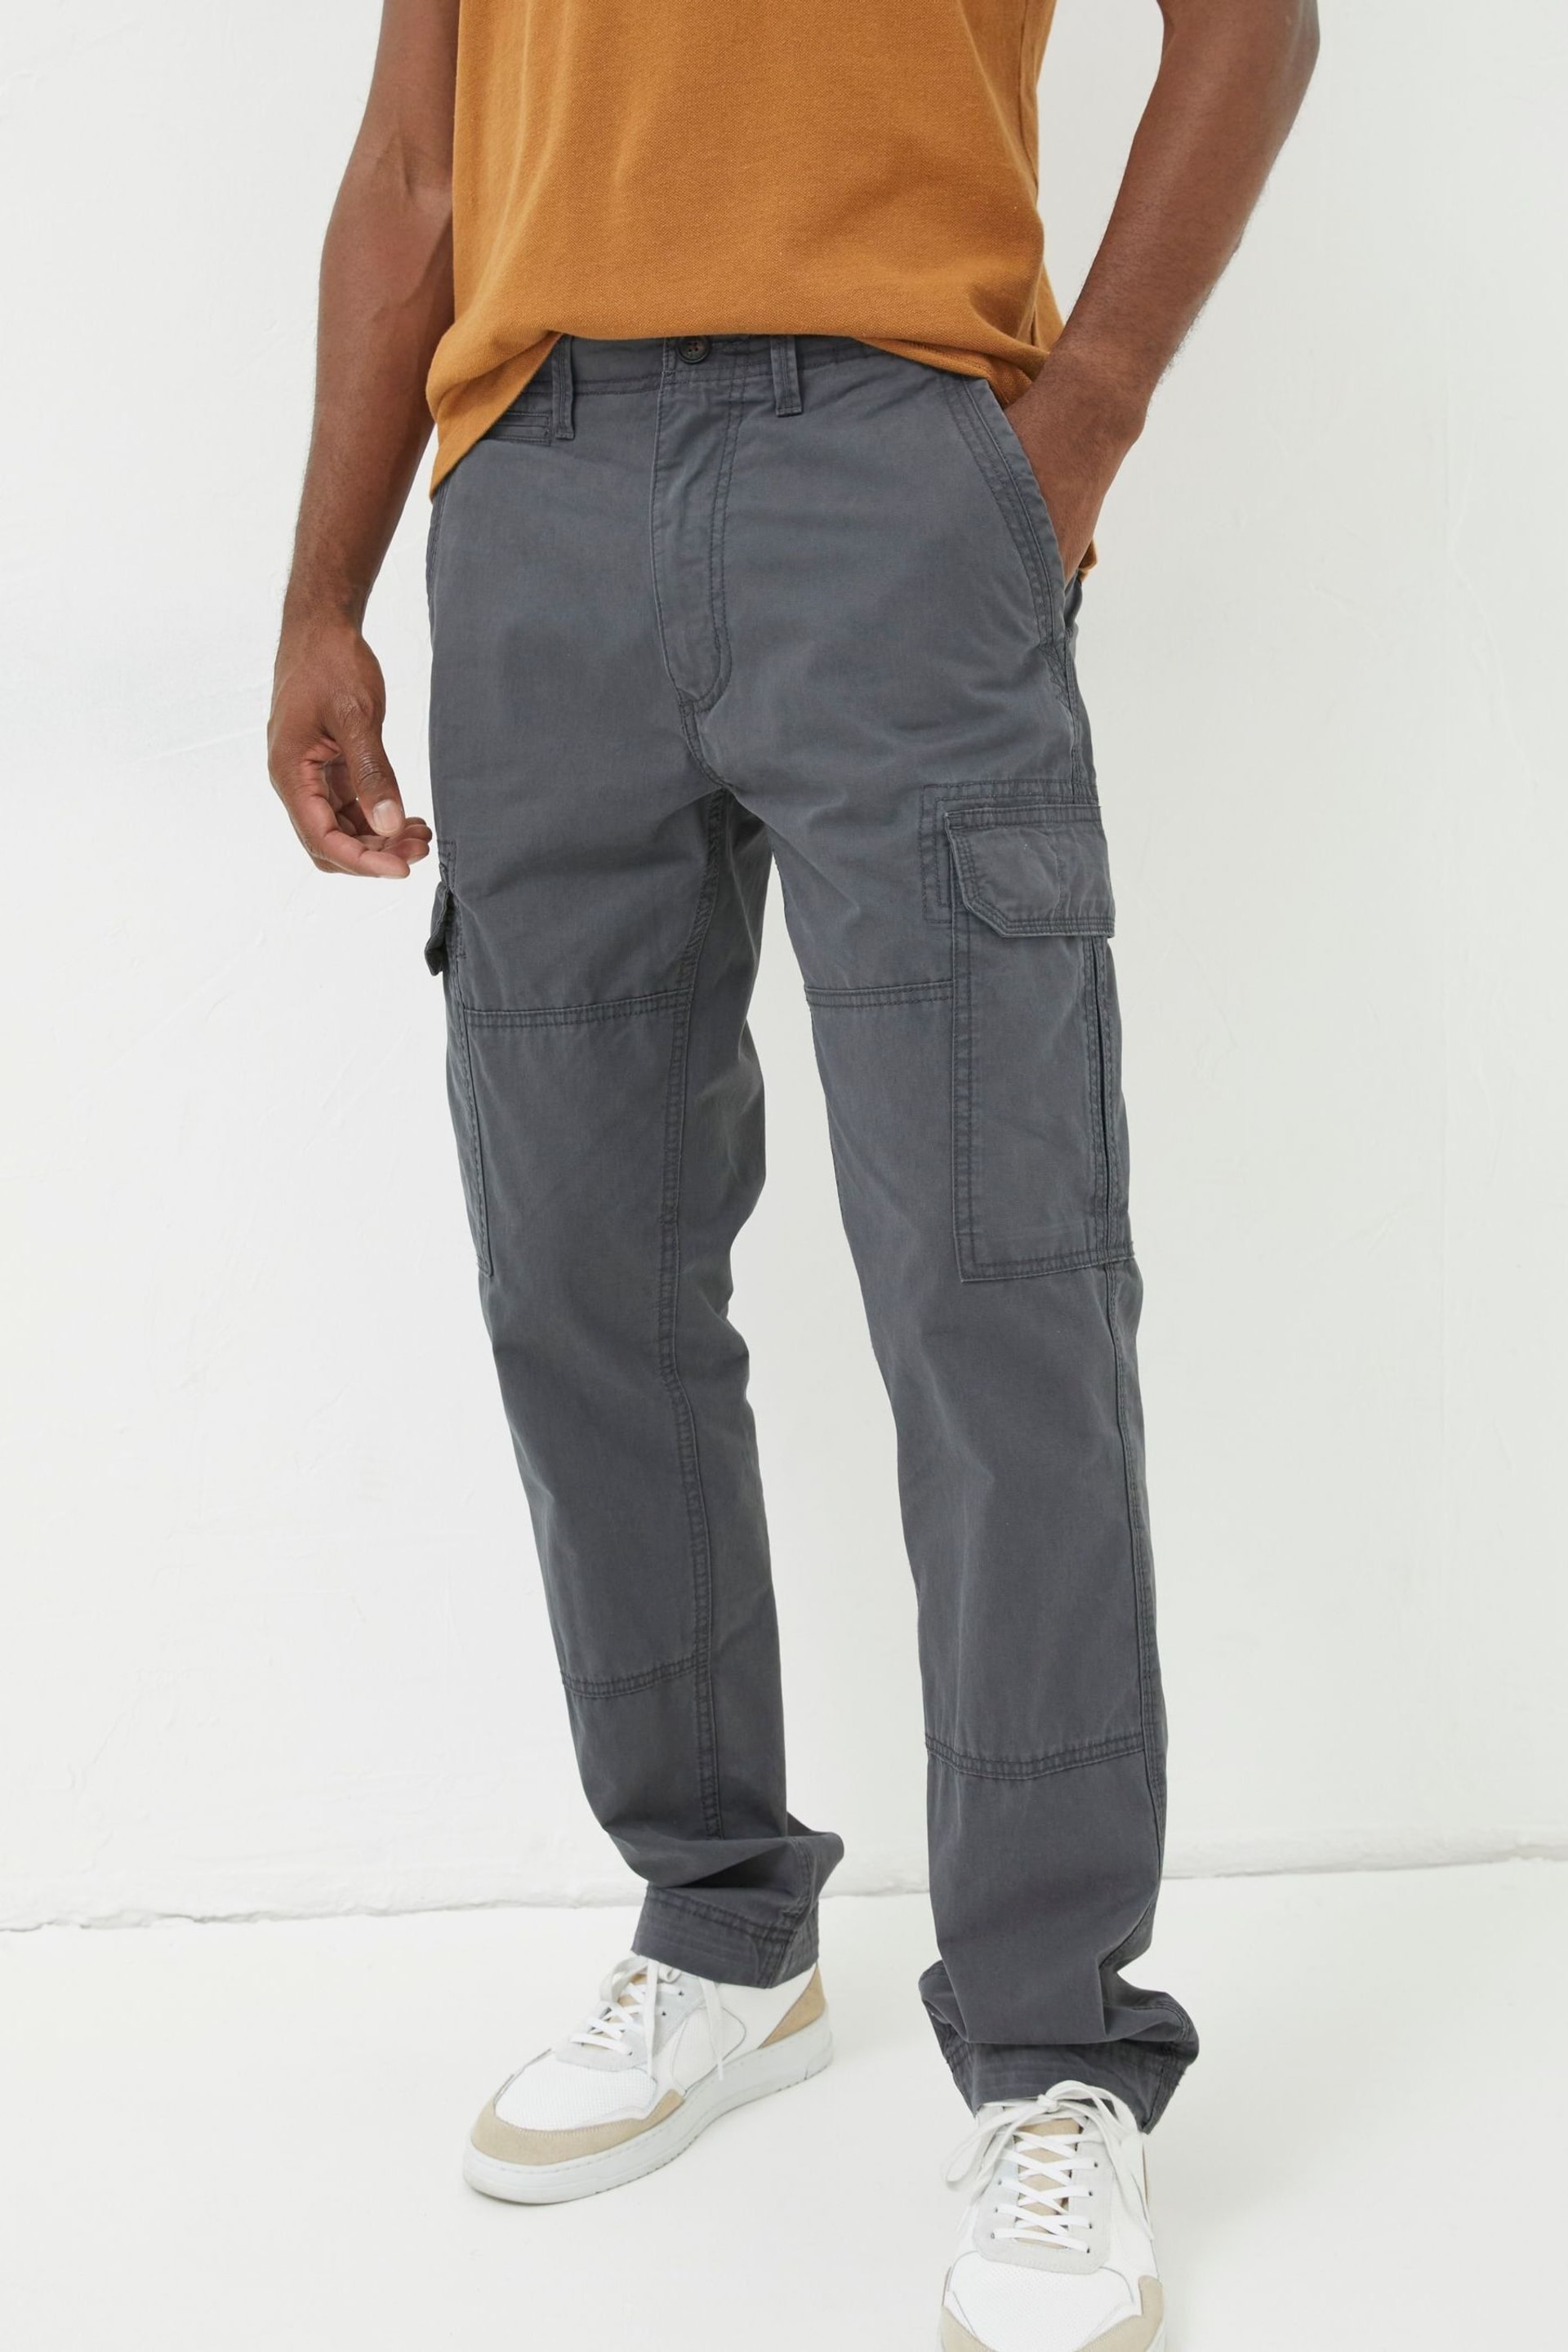 FatFace Grey Corby Ripstop Cargo Trousers - Image 1 of 5